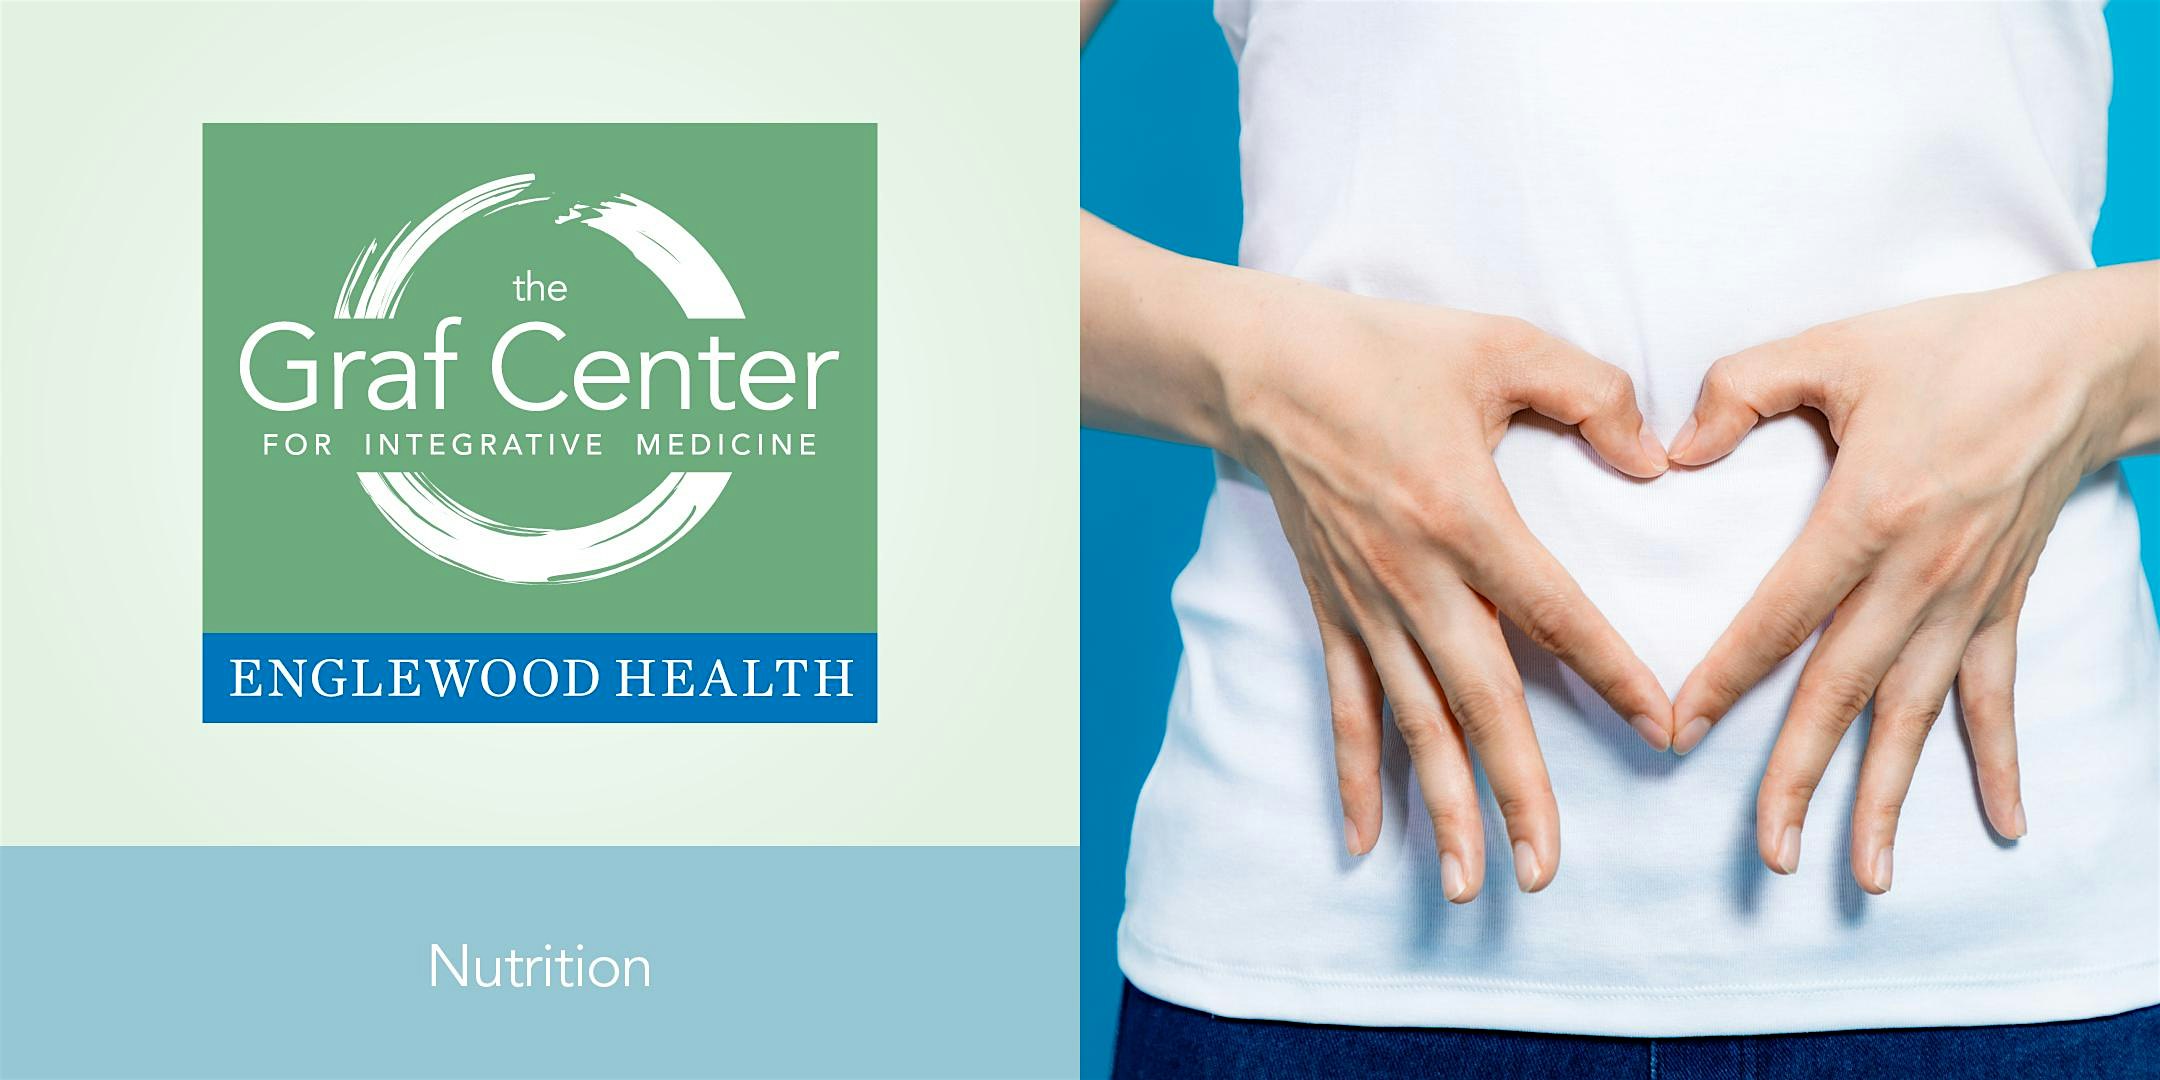 More info: Listen to Your Gut: Nutrition for Digestive Health